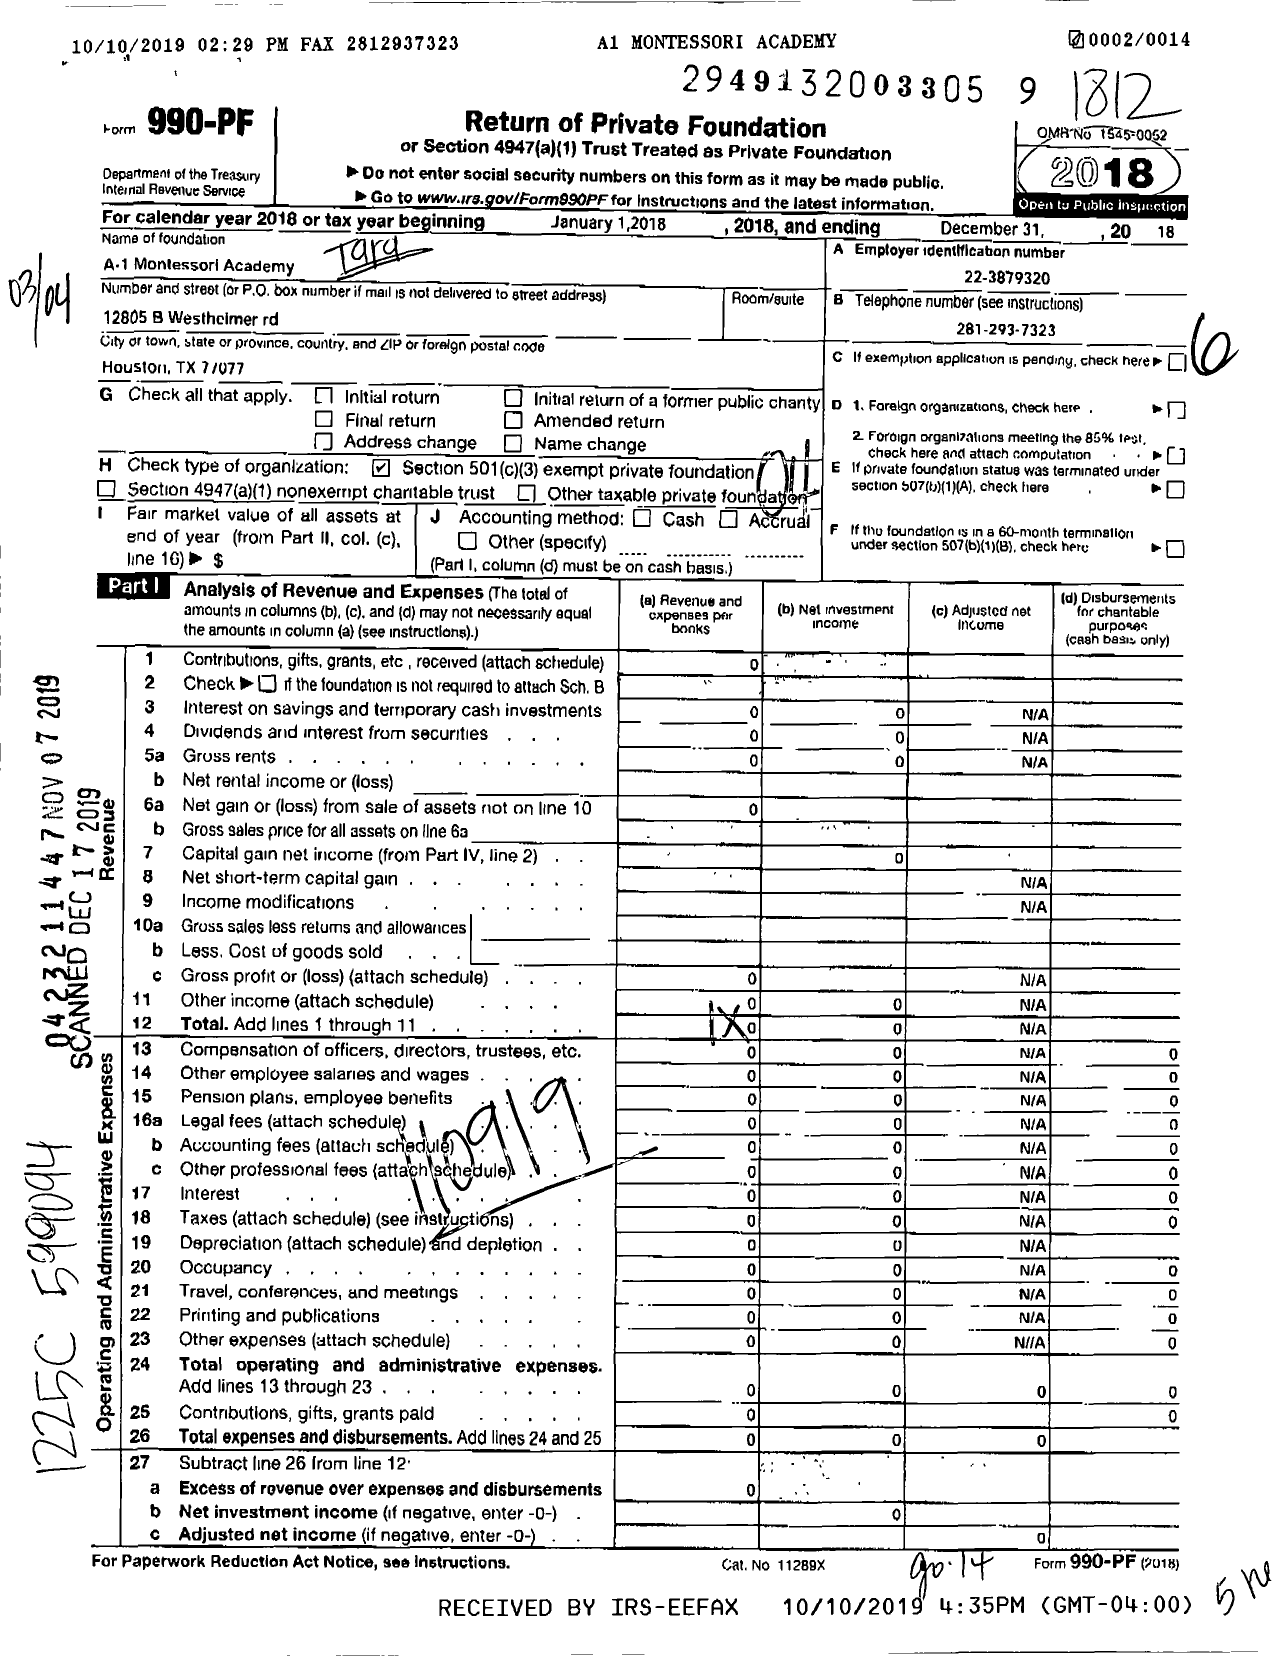 Image of first page of 2018 Form 990PF for A-1 Montessori Academy